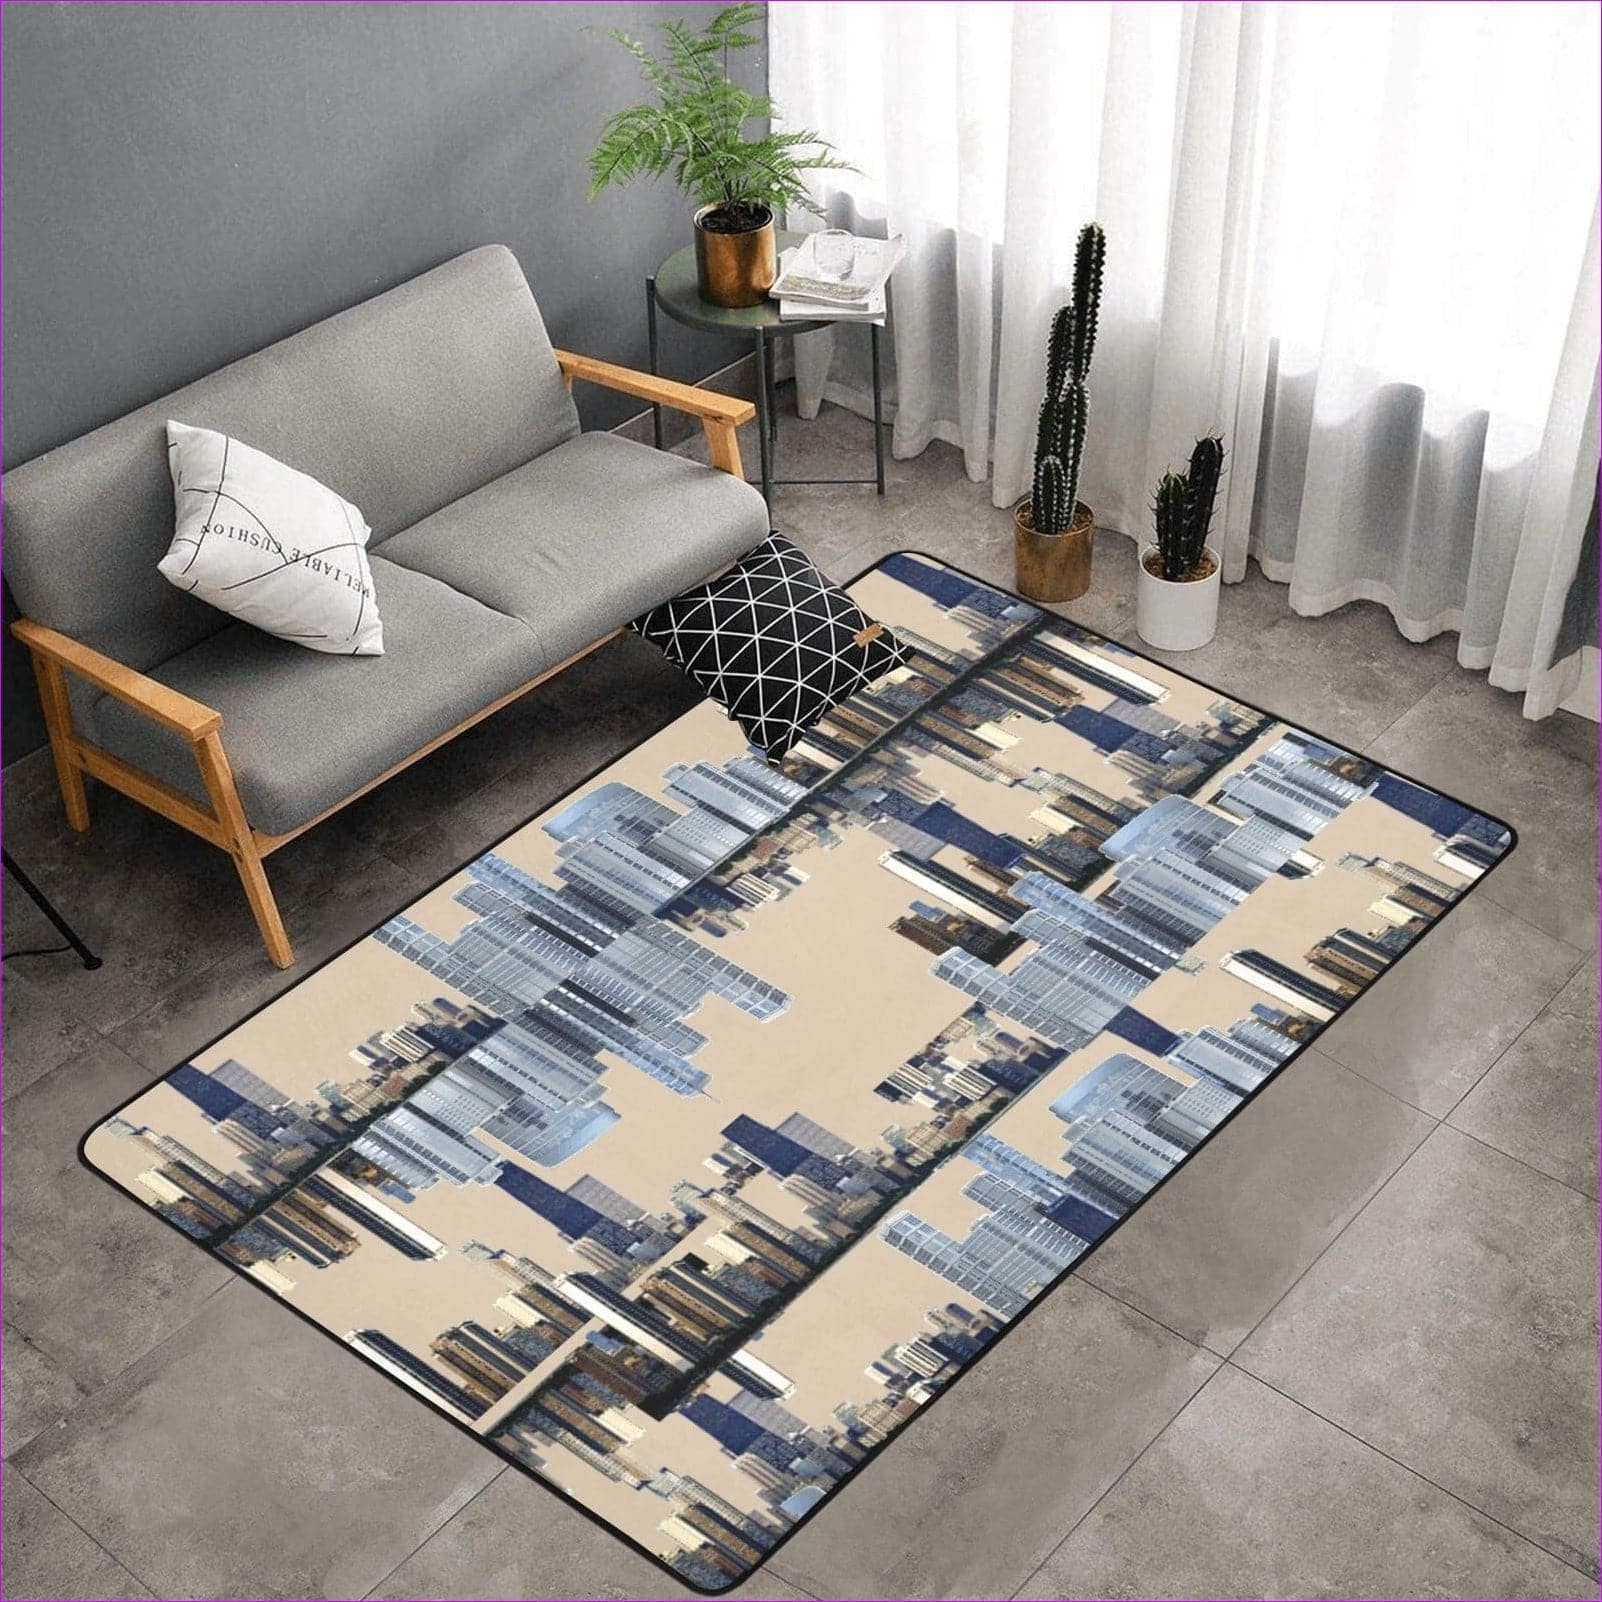 One Size city doubled Area Rug with Black Binding 7'x5' - City Blocks Area Rug (4 colors) - area rug at TFC&H Co.